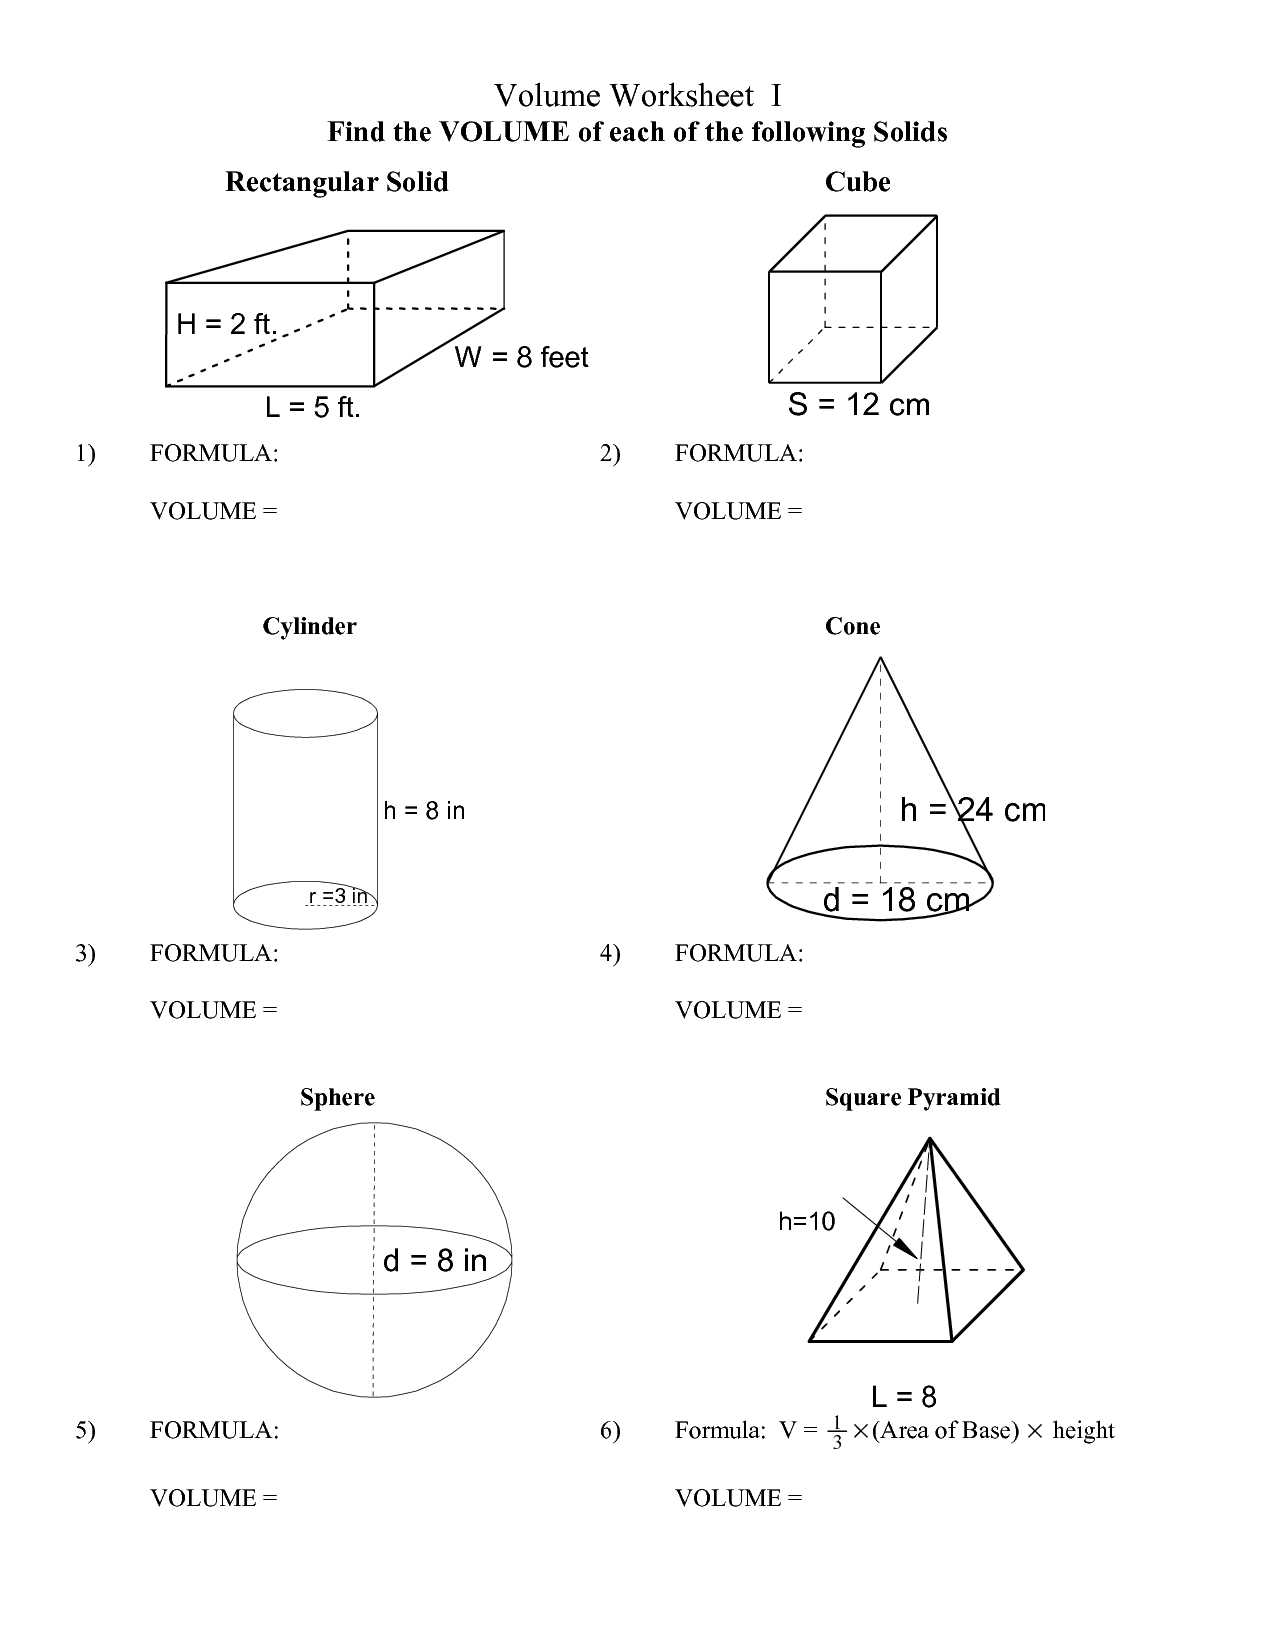 Volume Of Cones Cylinders and Spheres Worksheet Answers Along with Volume Pyramid and Cone Worksheet the Best Worksheets Image